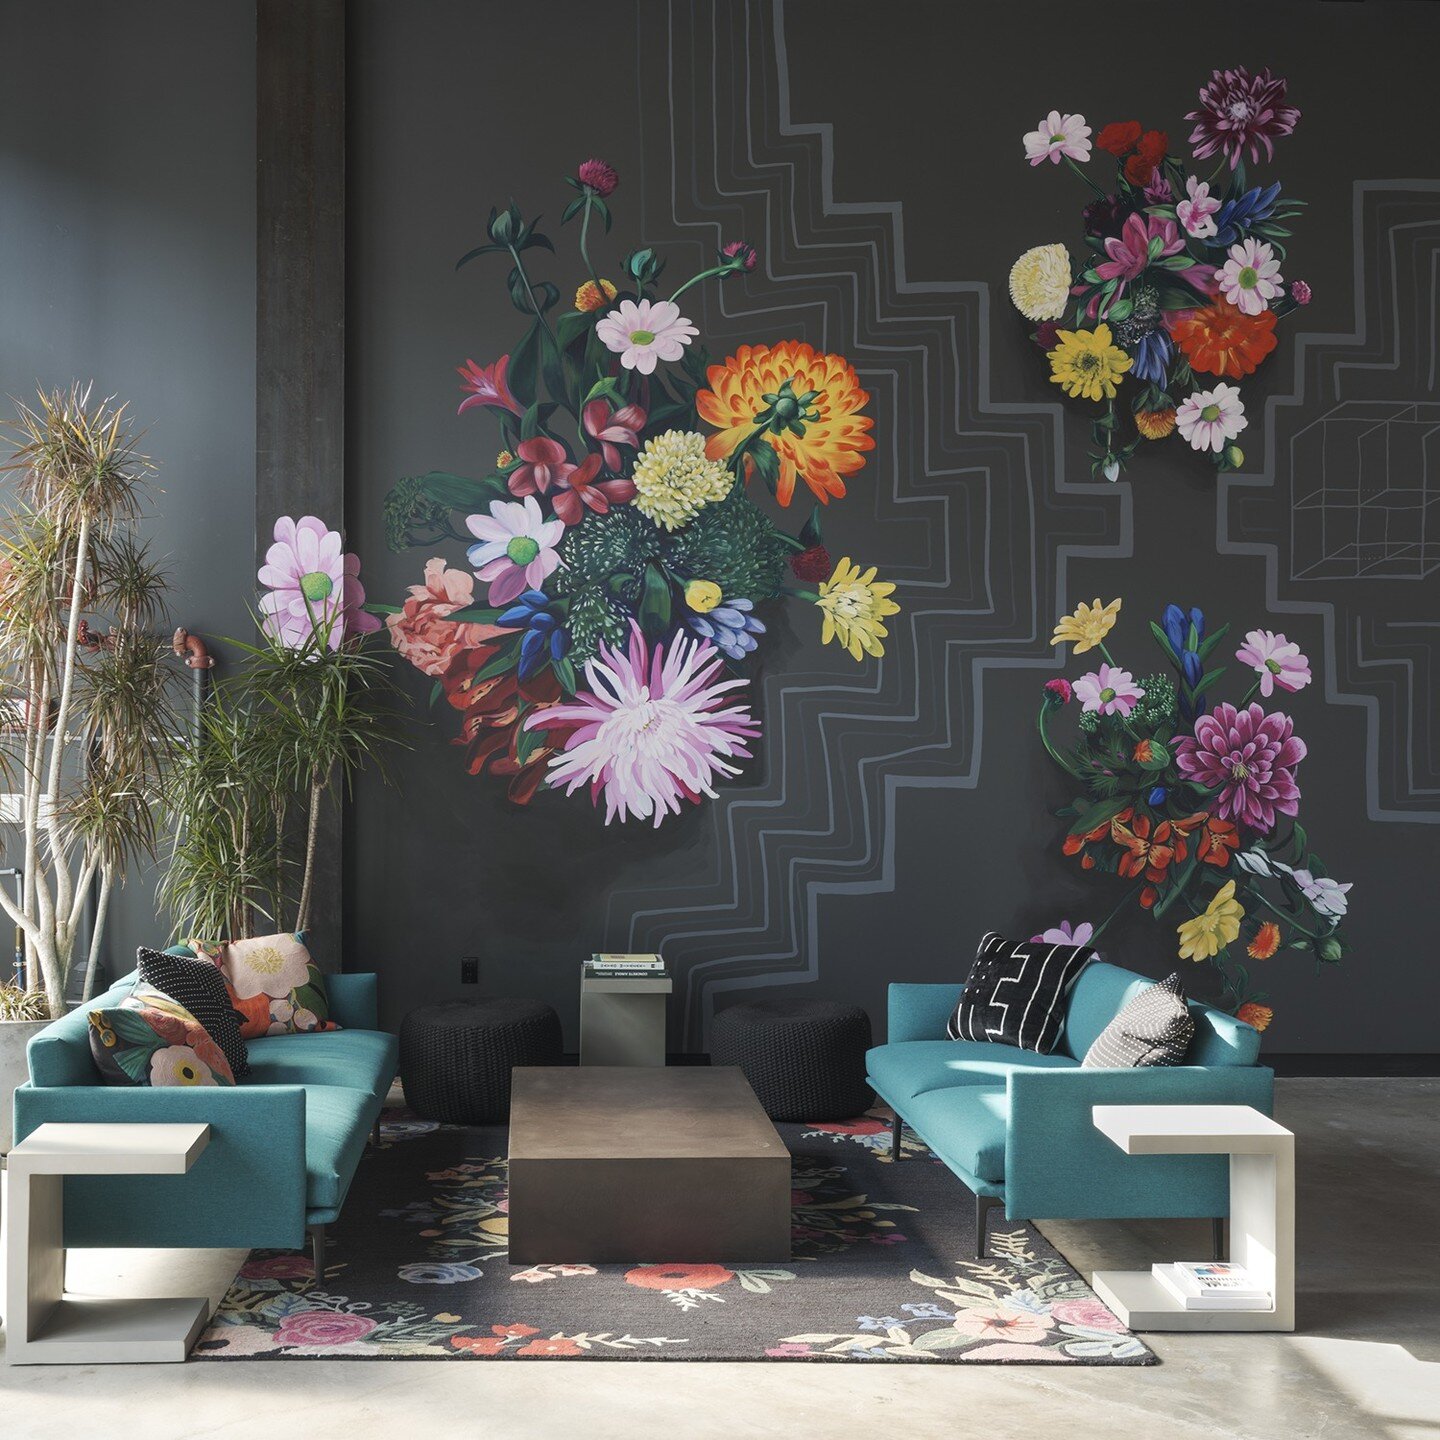 Spring is here! The city is blooming and so is the mural at Stone Way Auto. Book your next offsite meeting here and enjoy one of our modern, comfortable, bright, casual meeting sit spots.

#StoneWayAuto #StoneWayAutoEvents #ModernEventSpace #EventVen